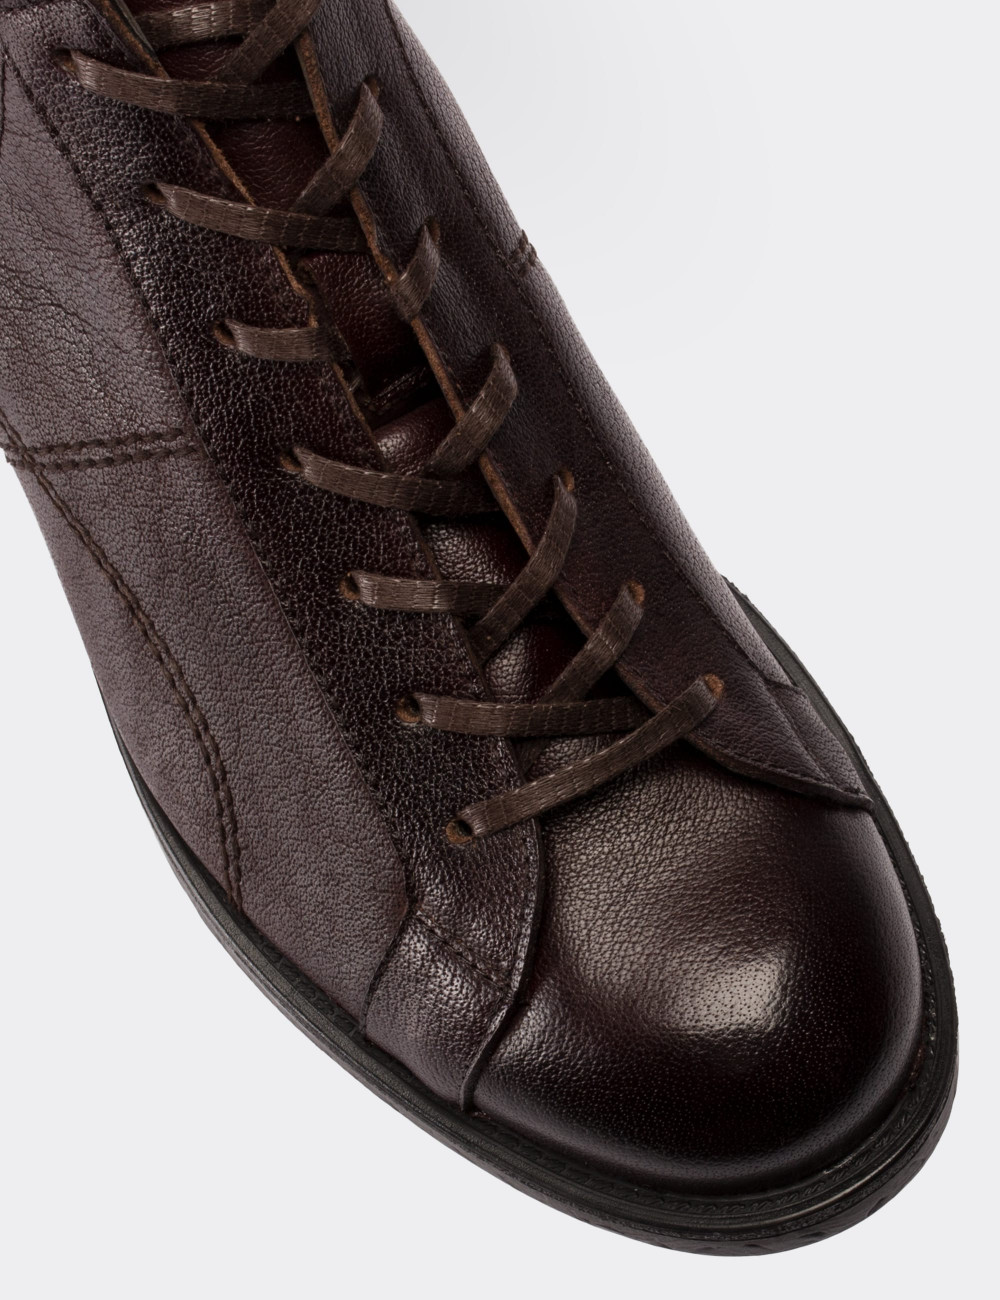 Brown  Leather Boots - 01760MKHVC01